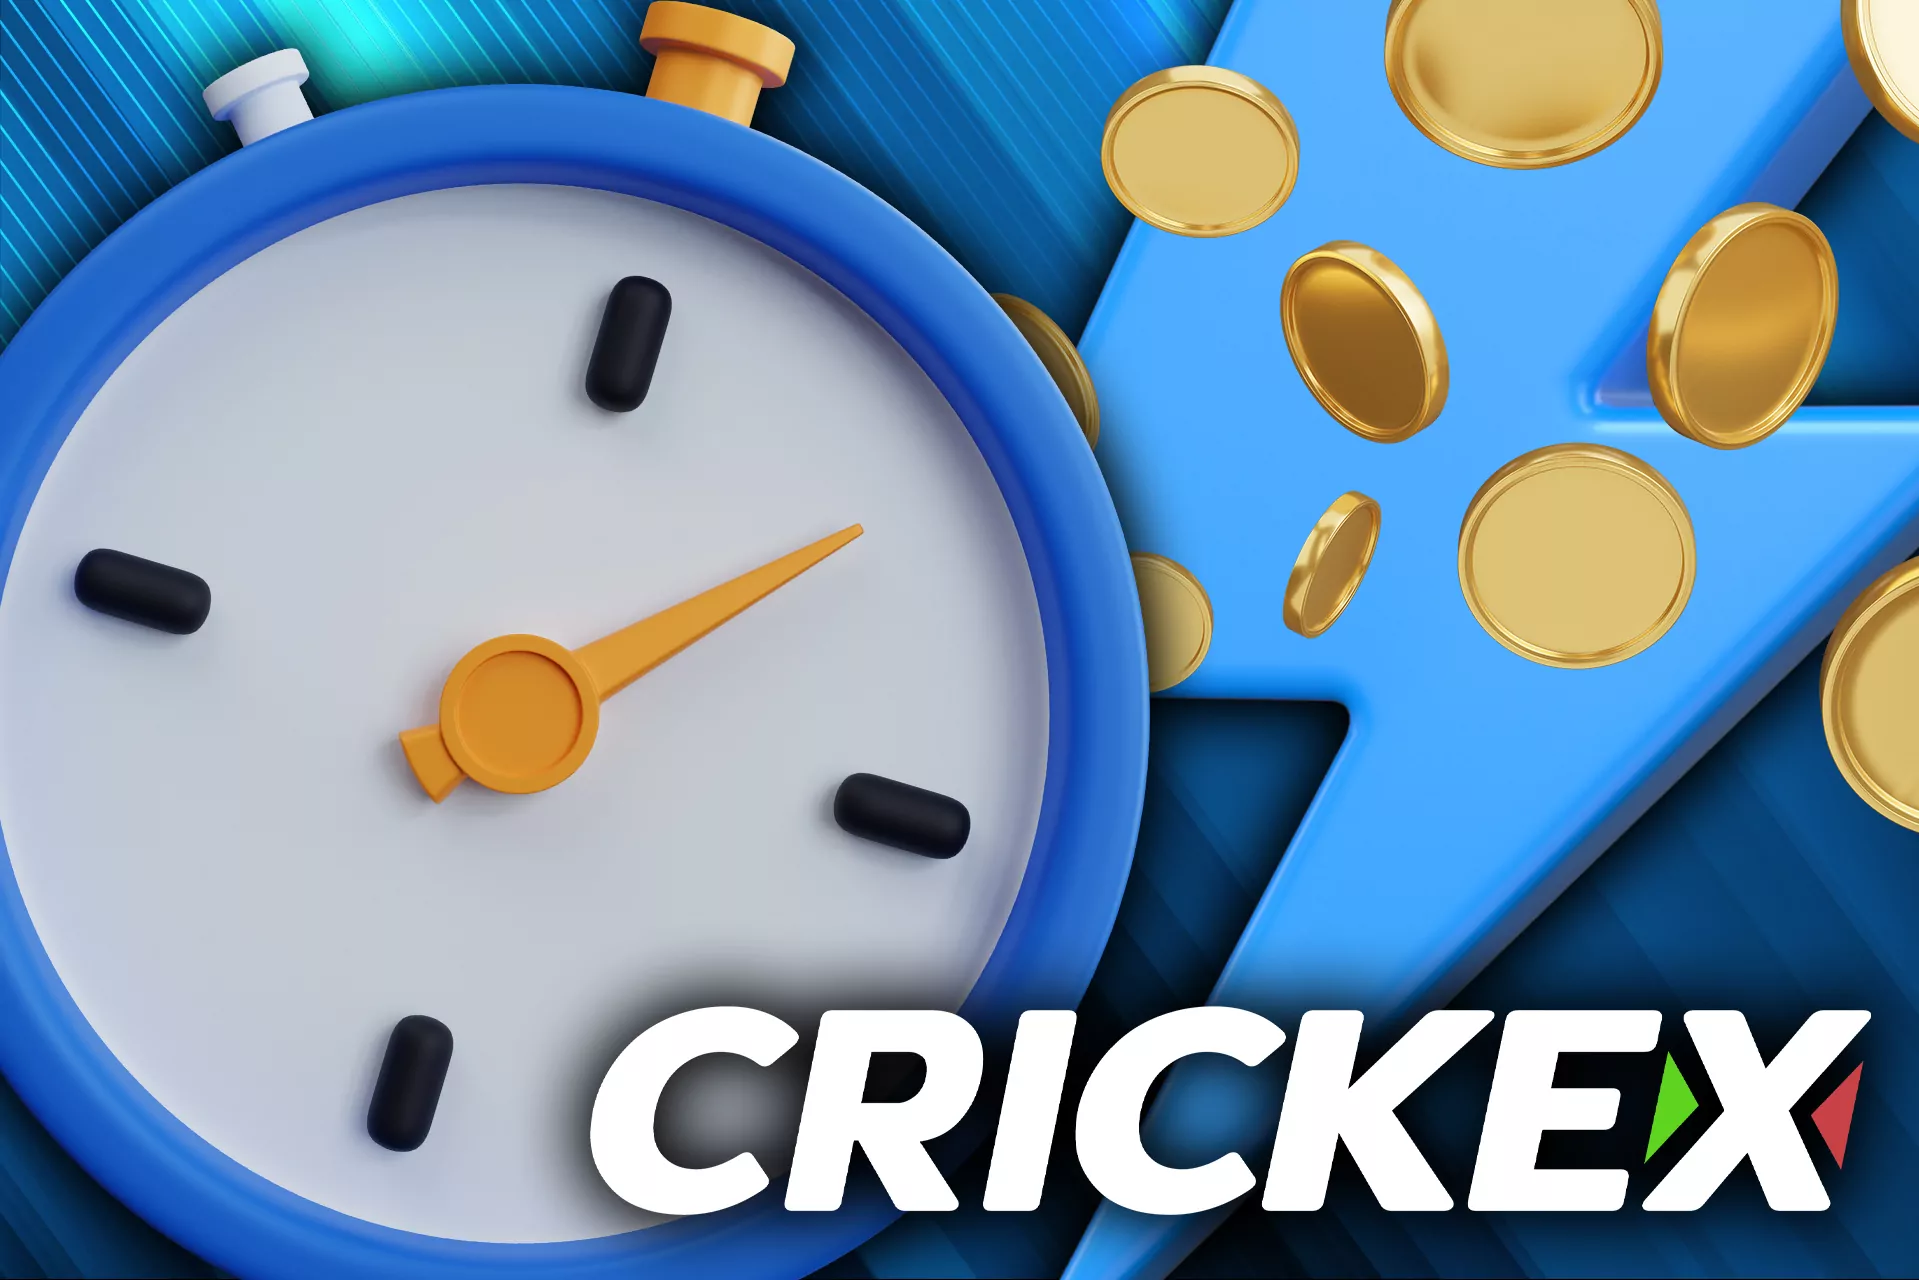 Make instant payment at Crickex.